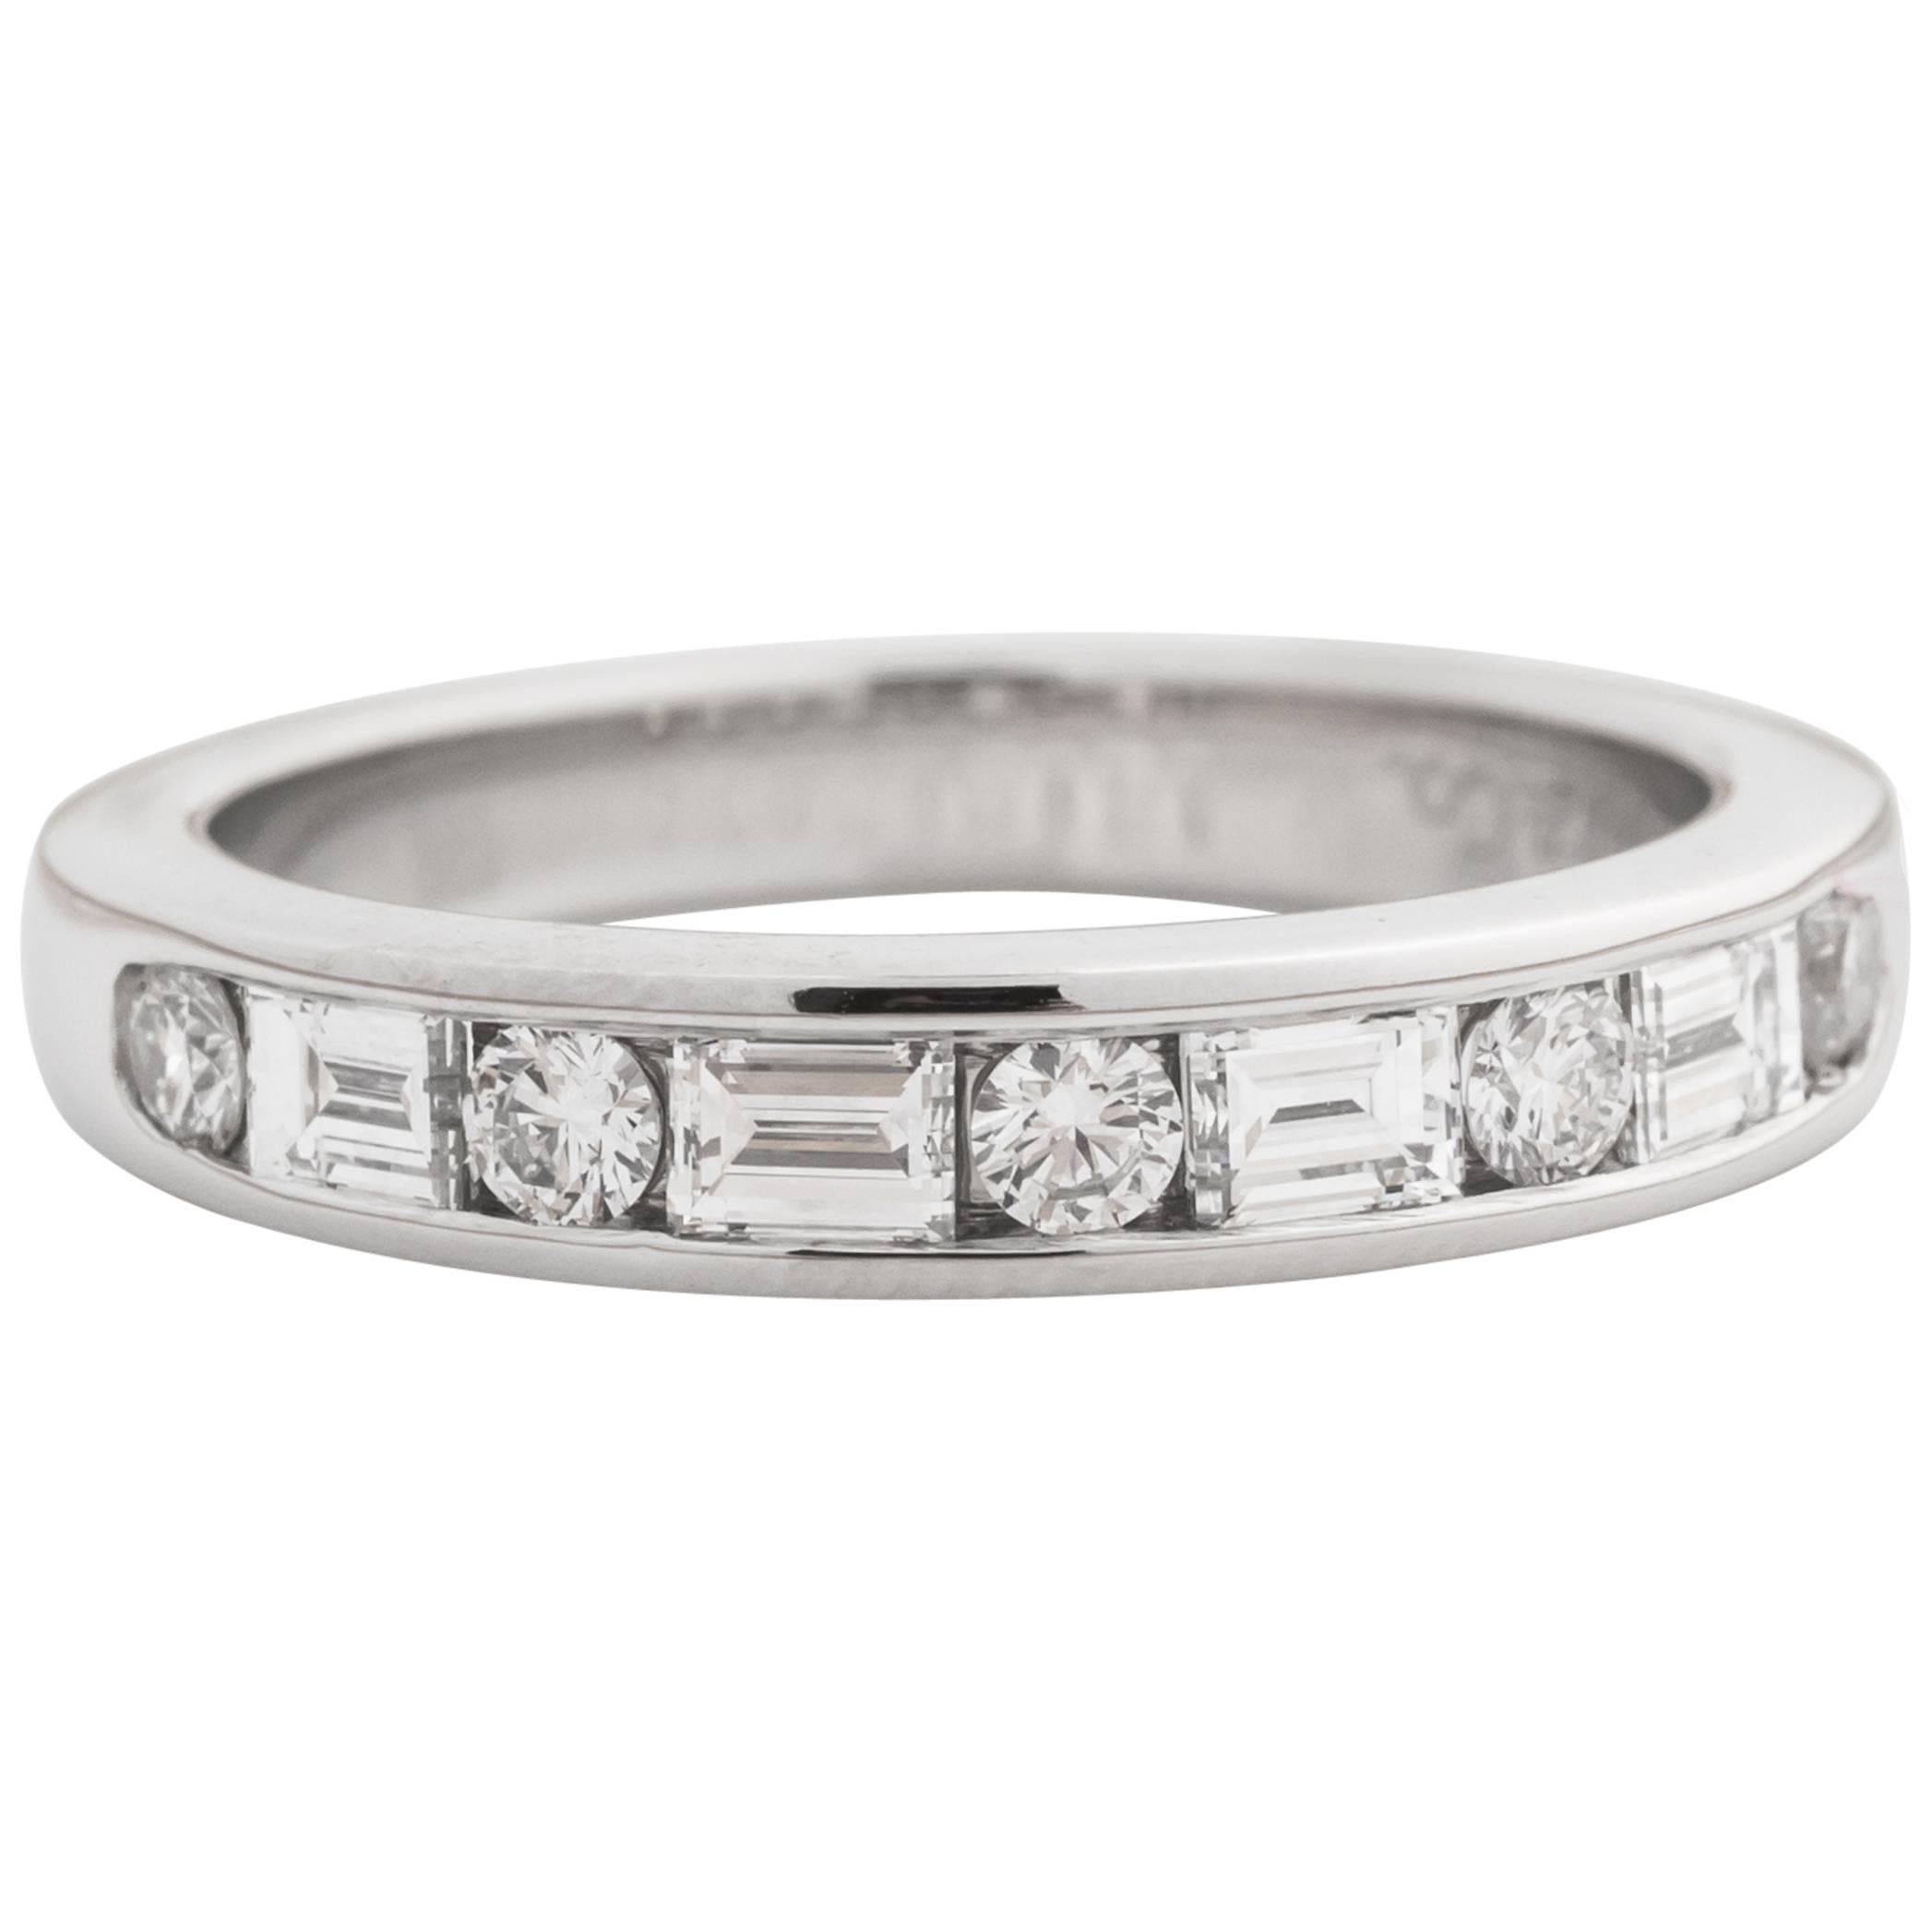 Tiffany & Co. Alternating Round and Baguette Diamond Platinum Band Ring 